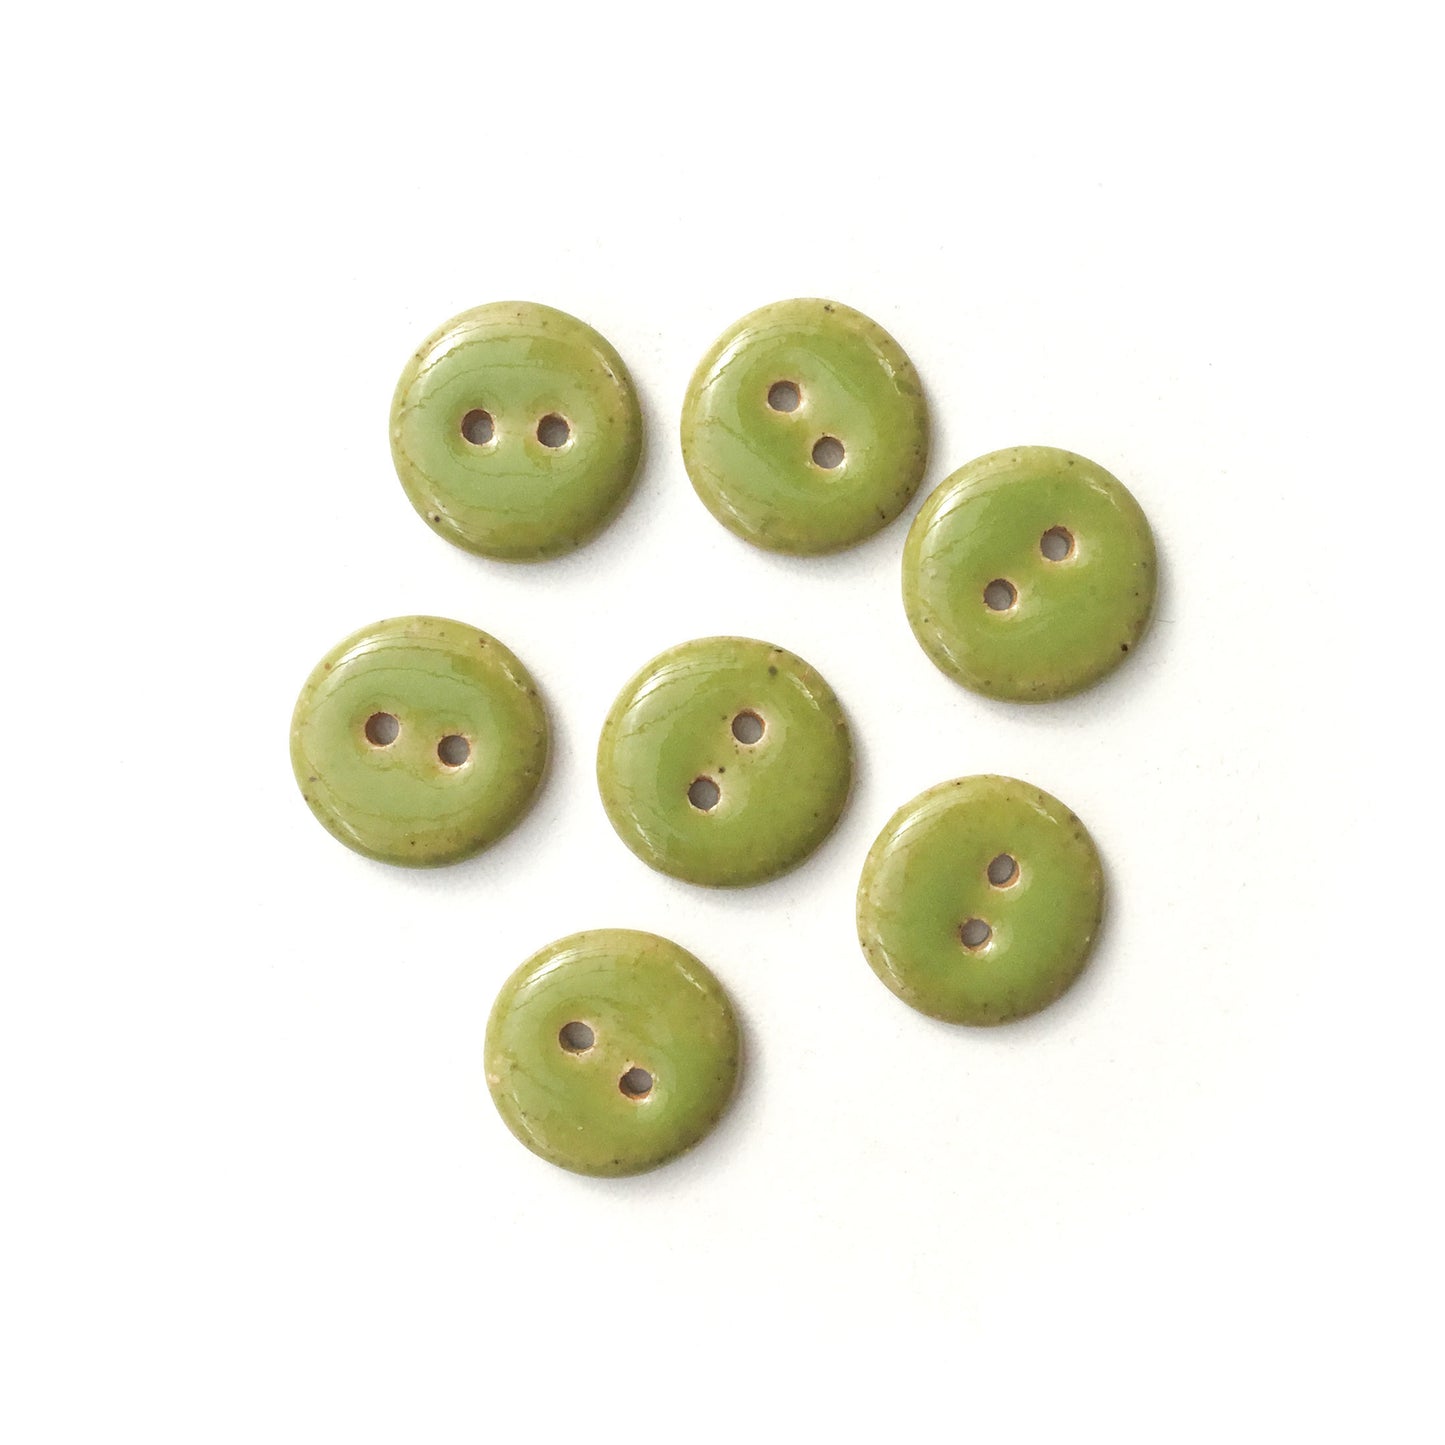 Olive Green Ceramic Stoneware Buttons - Green Clay Buttons - 5/8" - 7 Pack